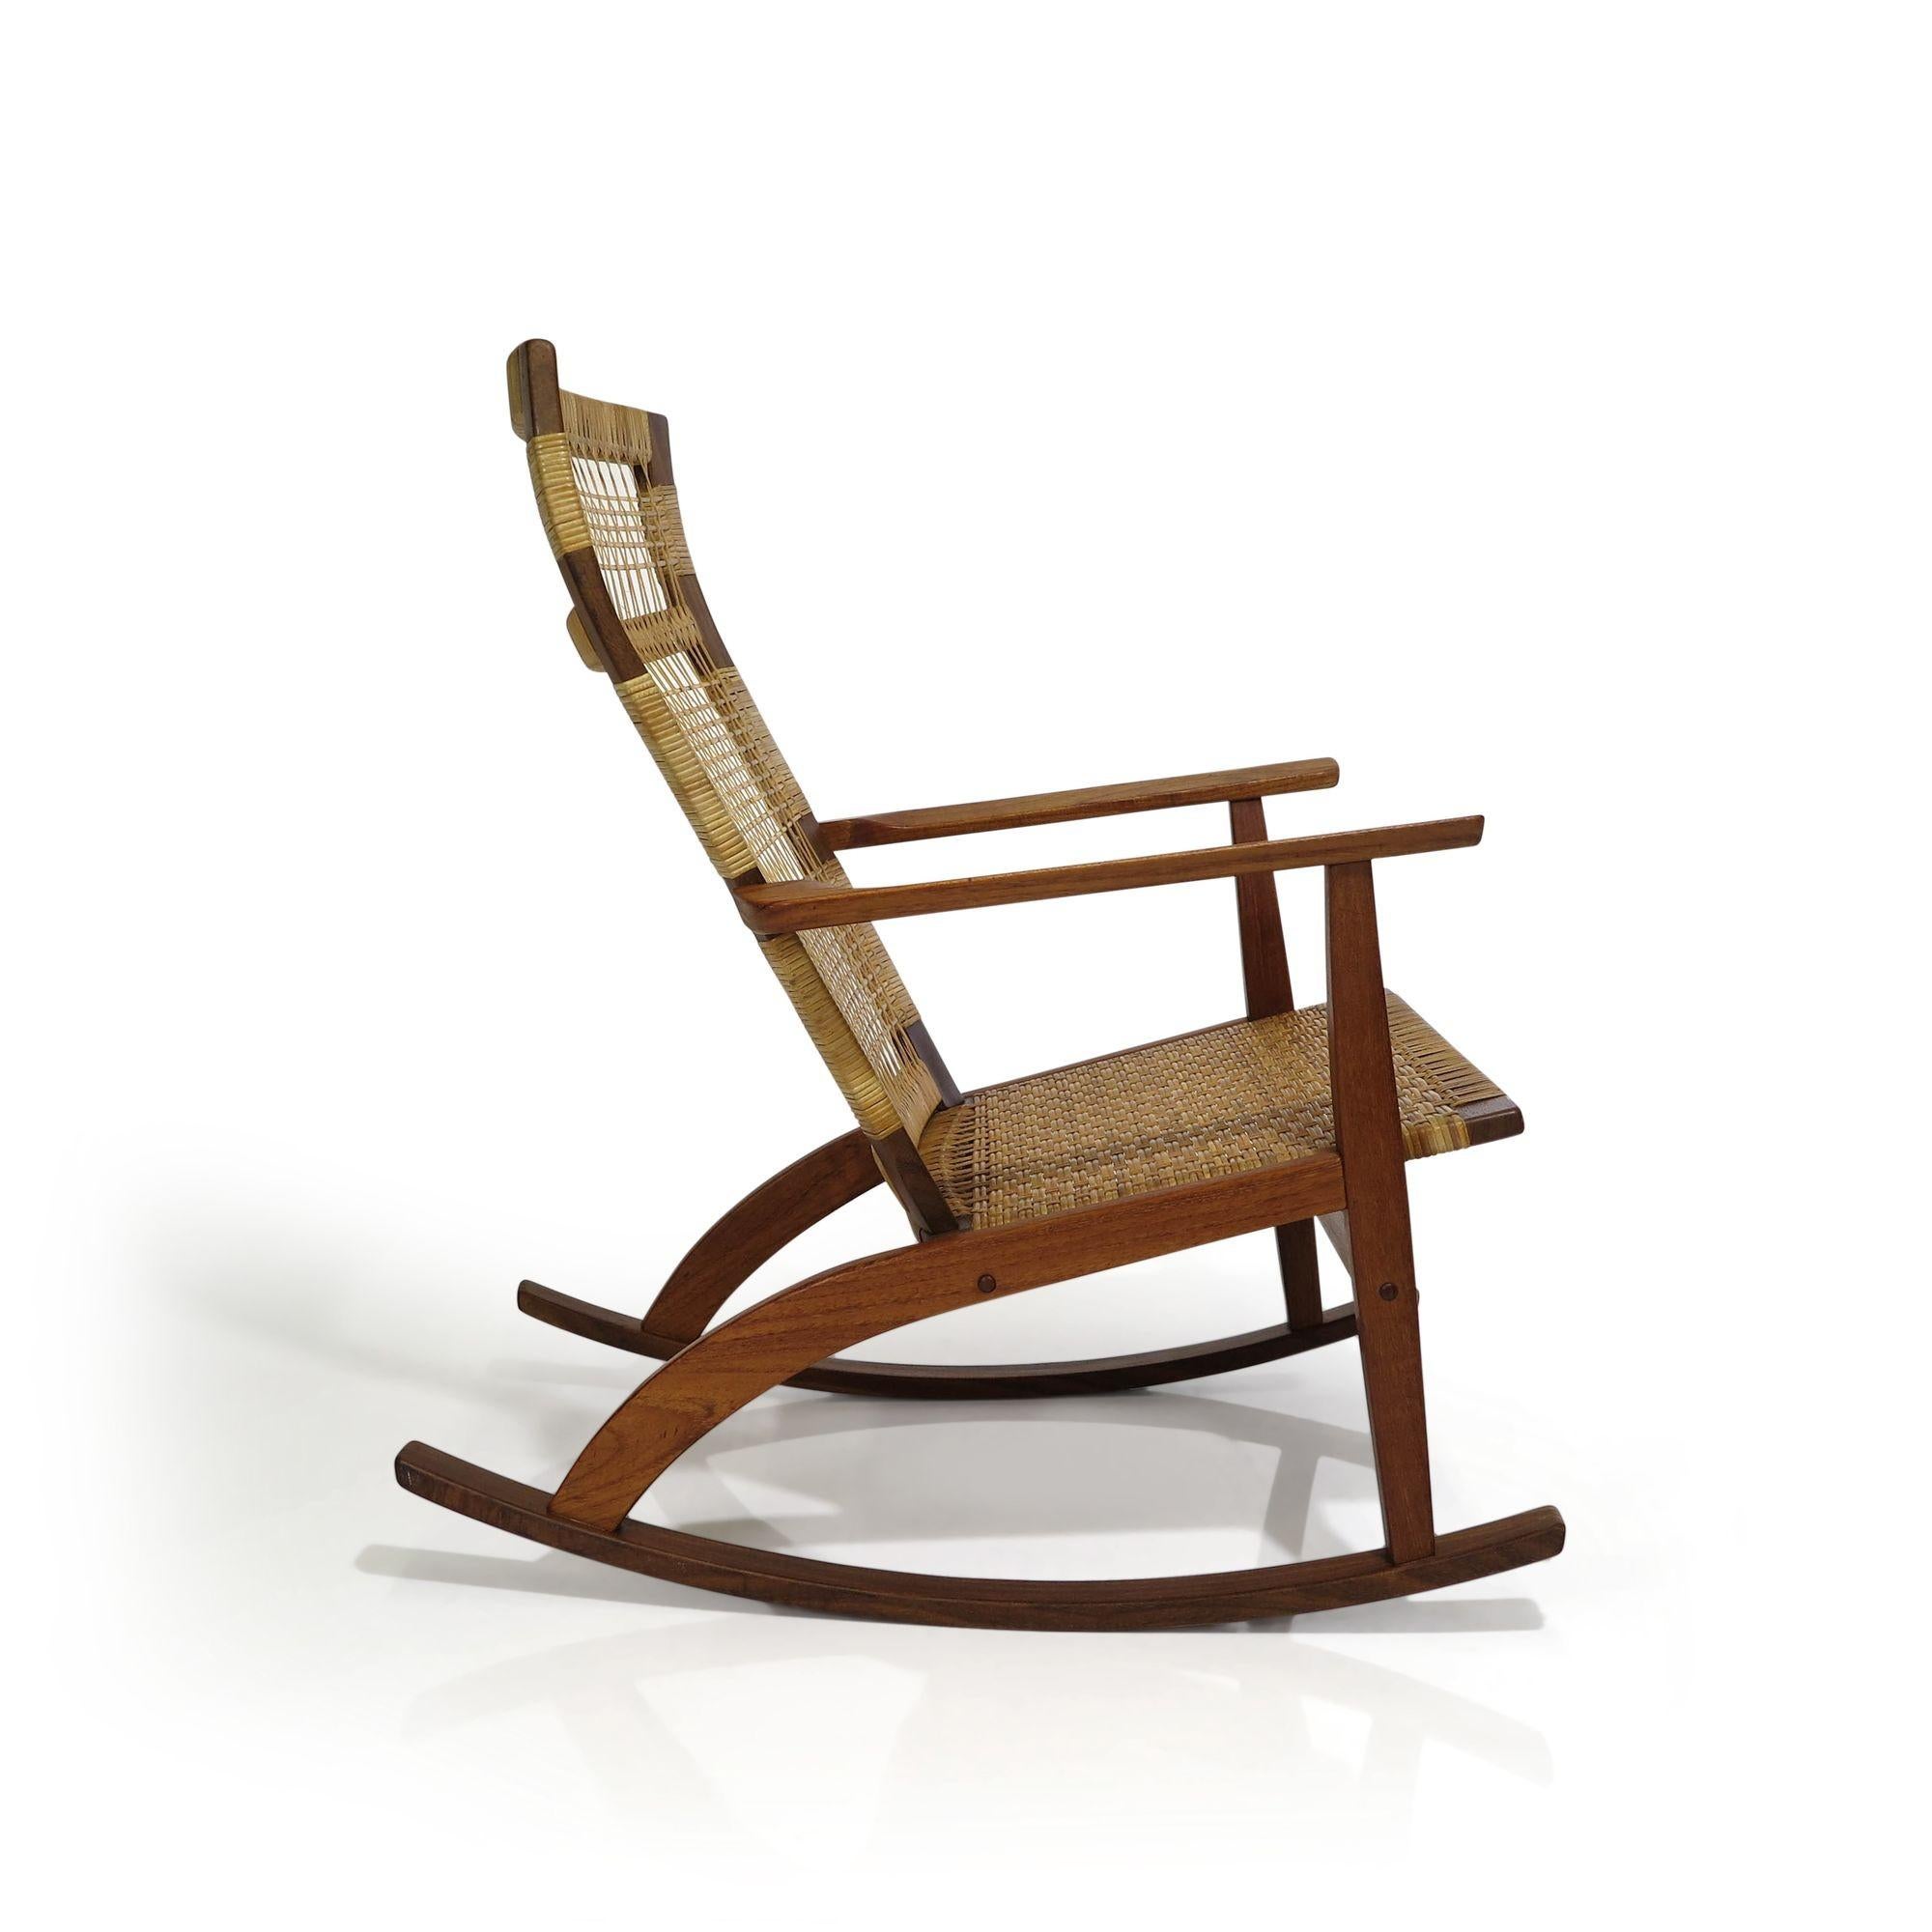 Danish Teak rocking chair designed by Hans Olsen for Juul Kristensen, 1955, Denmark. The chair is crafted of solid teak with woven cane seat and back. The chair has been lightly cleaned and oiled.
Measurements
W 25.25'' x D 32.25'' x H 34.75''